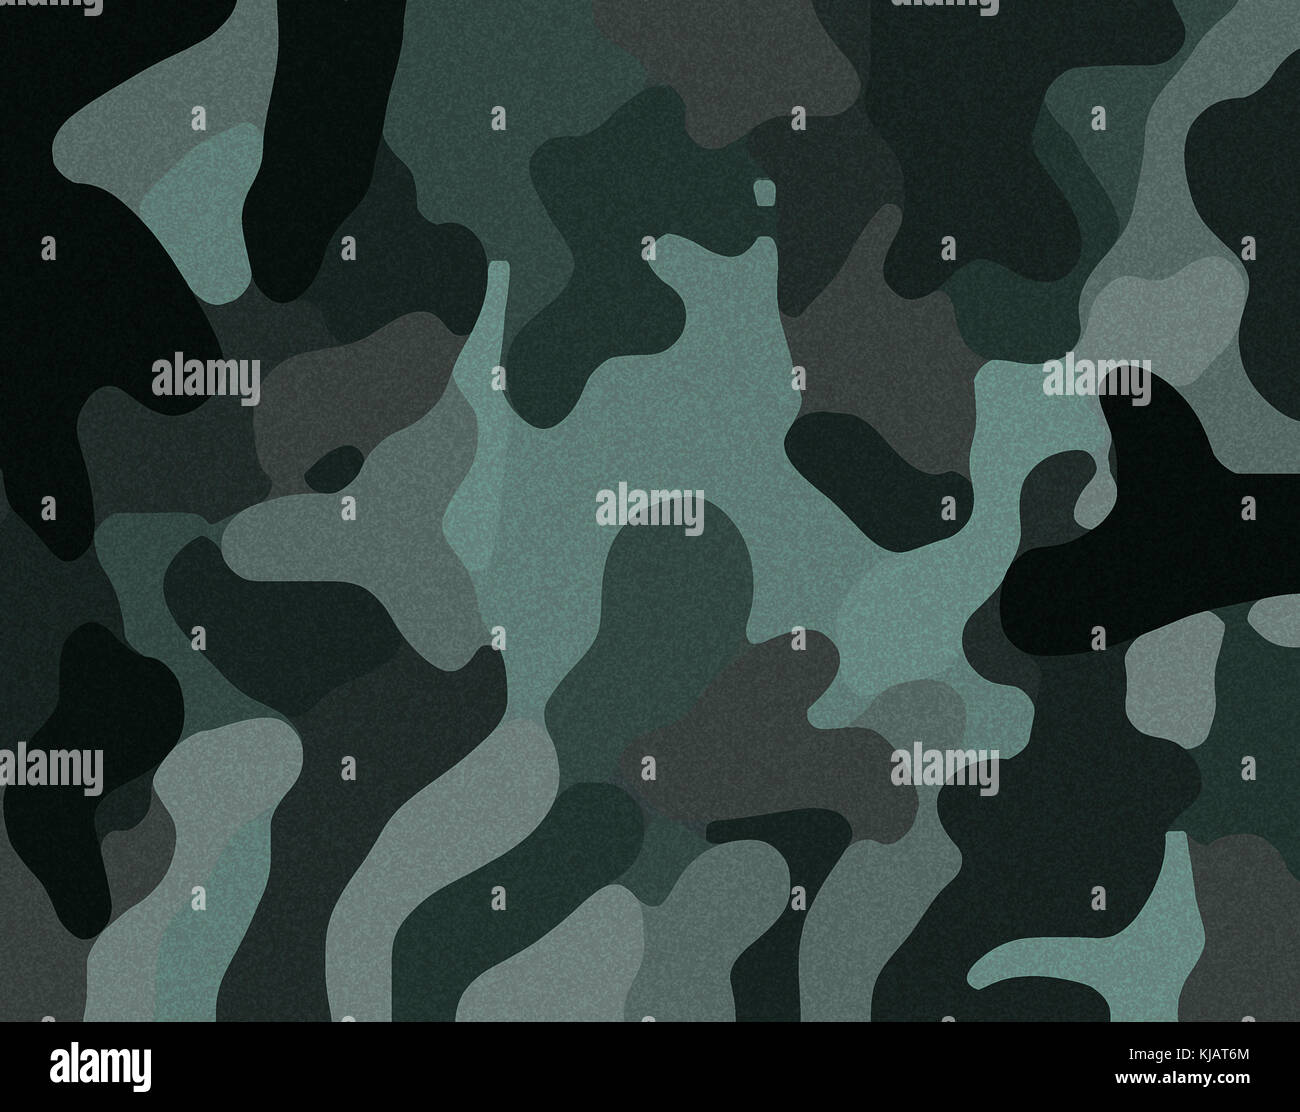 a colored sand camouflage illustration Stock Photo